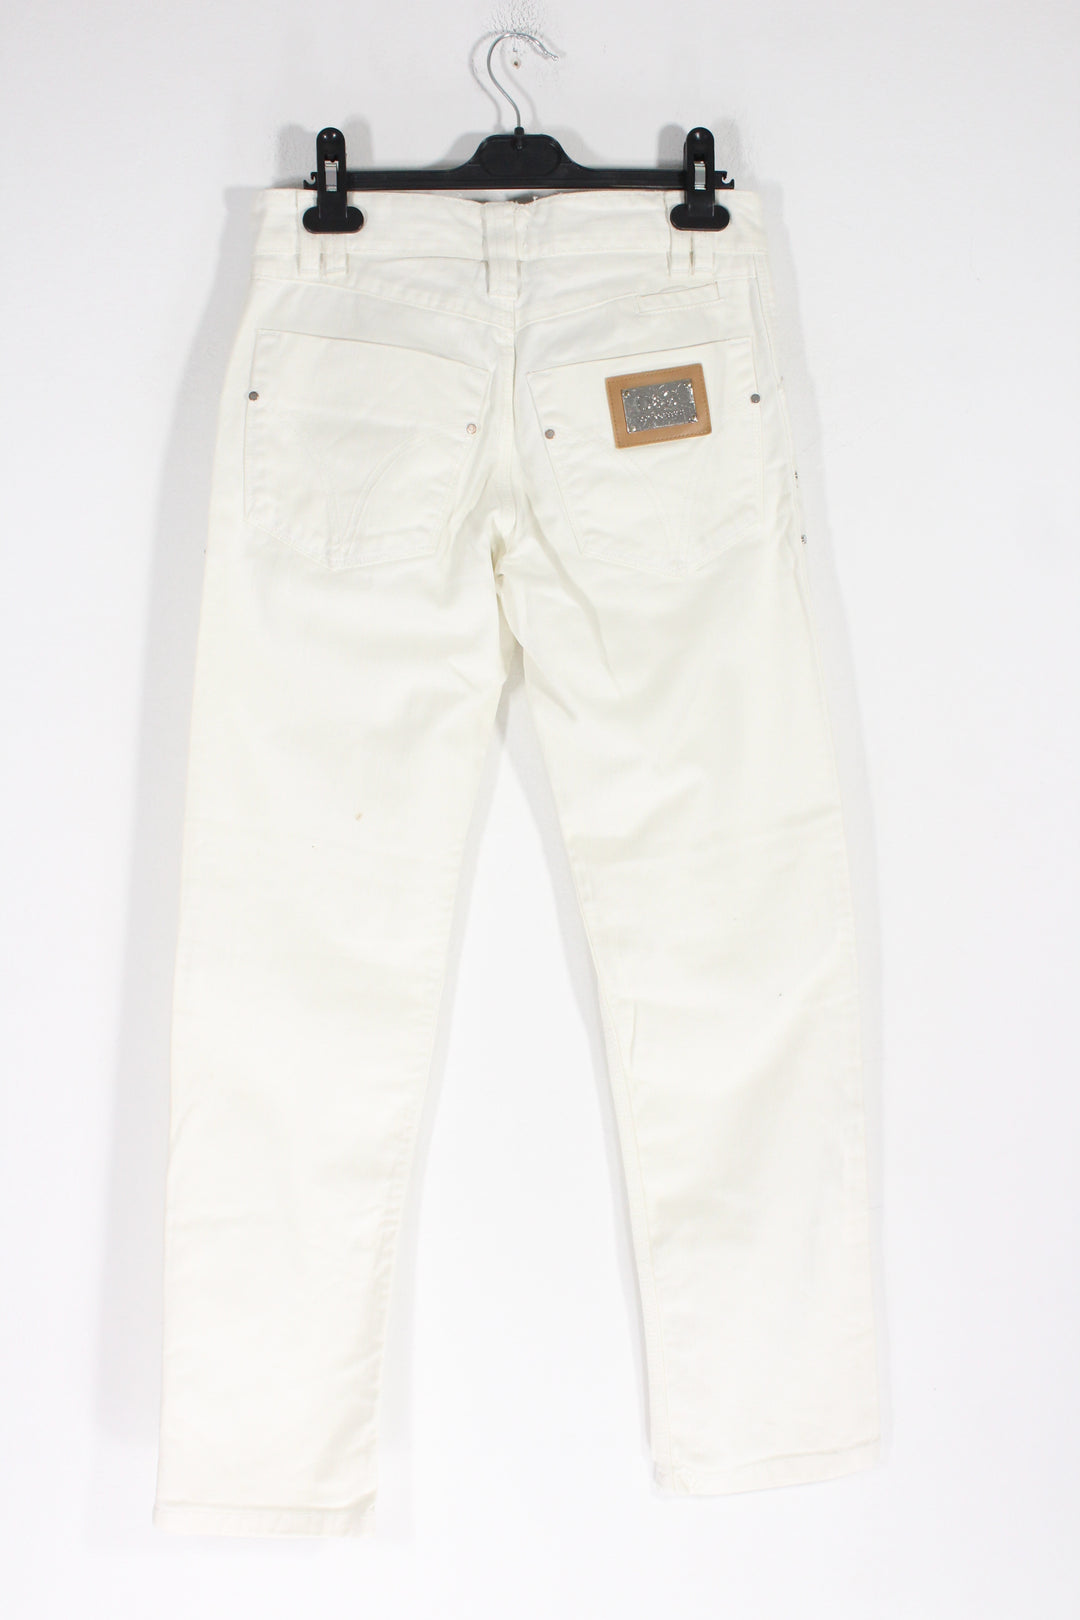 Dolce&Cabbana Jeans Women's Small(34)